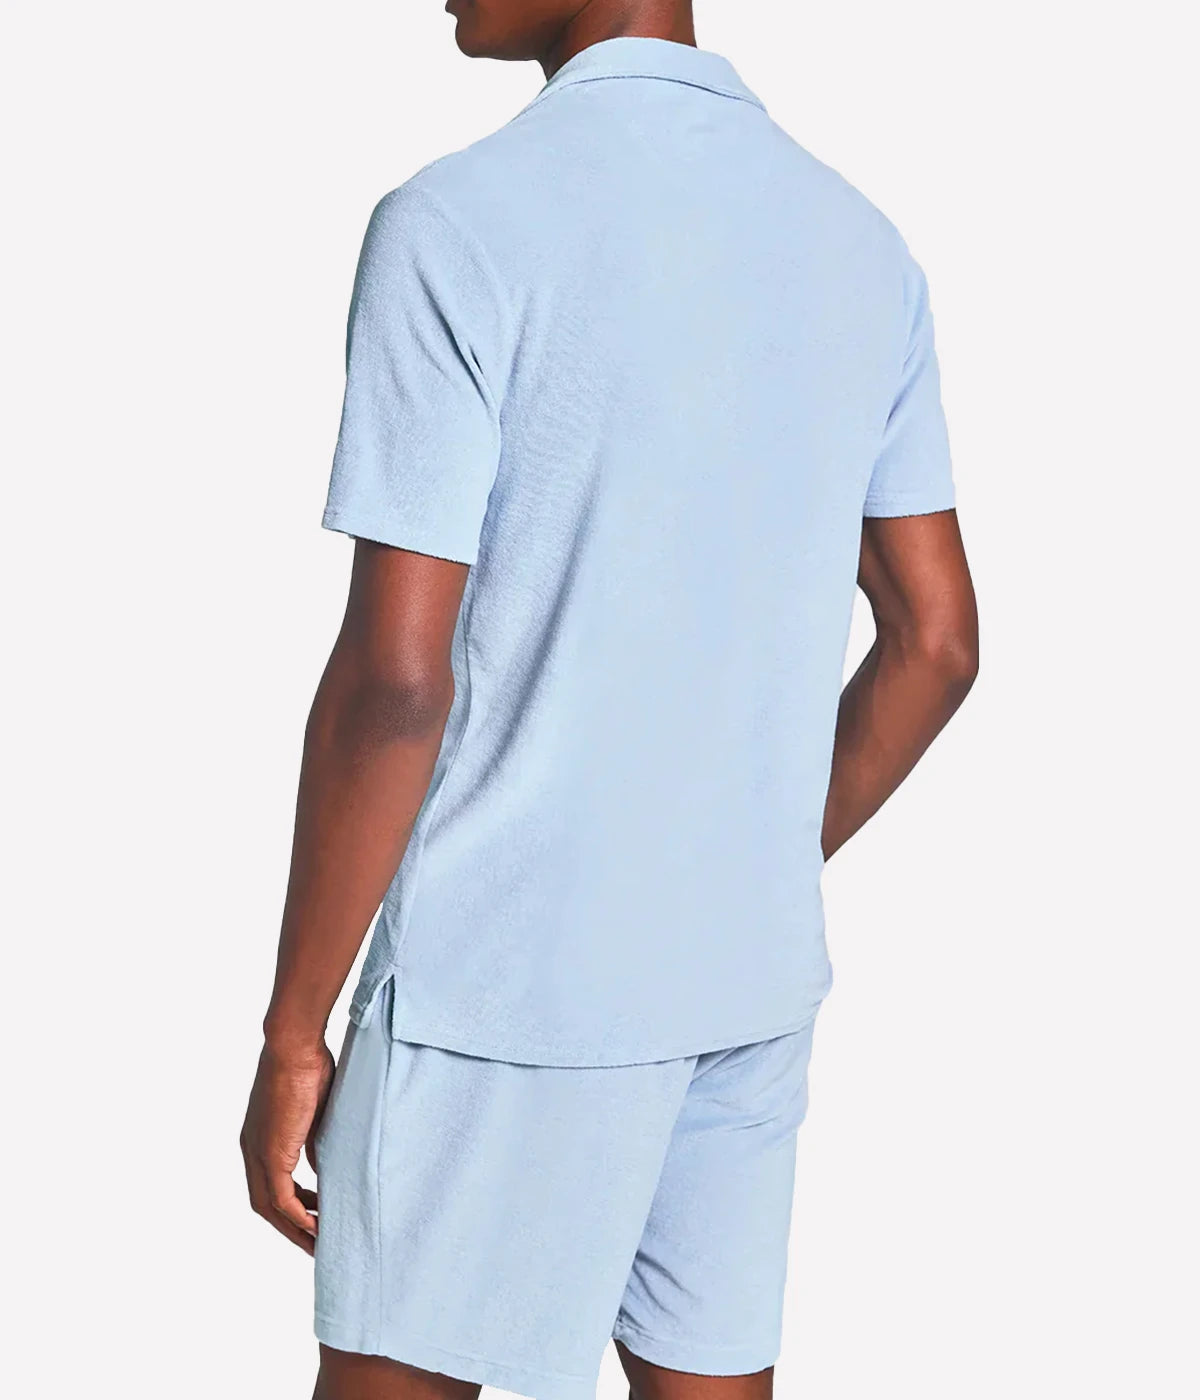 Faustino Terry Cotton Blend Polo in Baby Blue